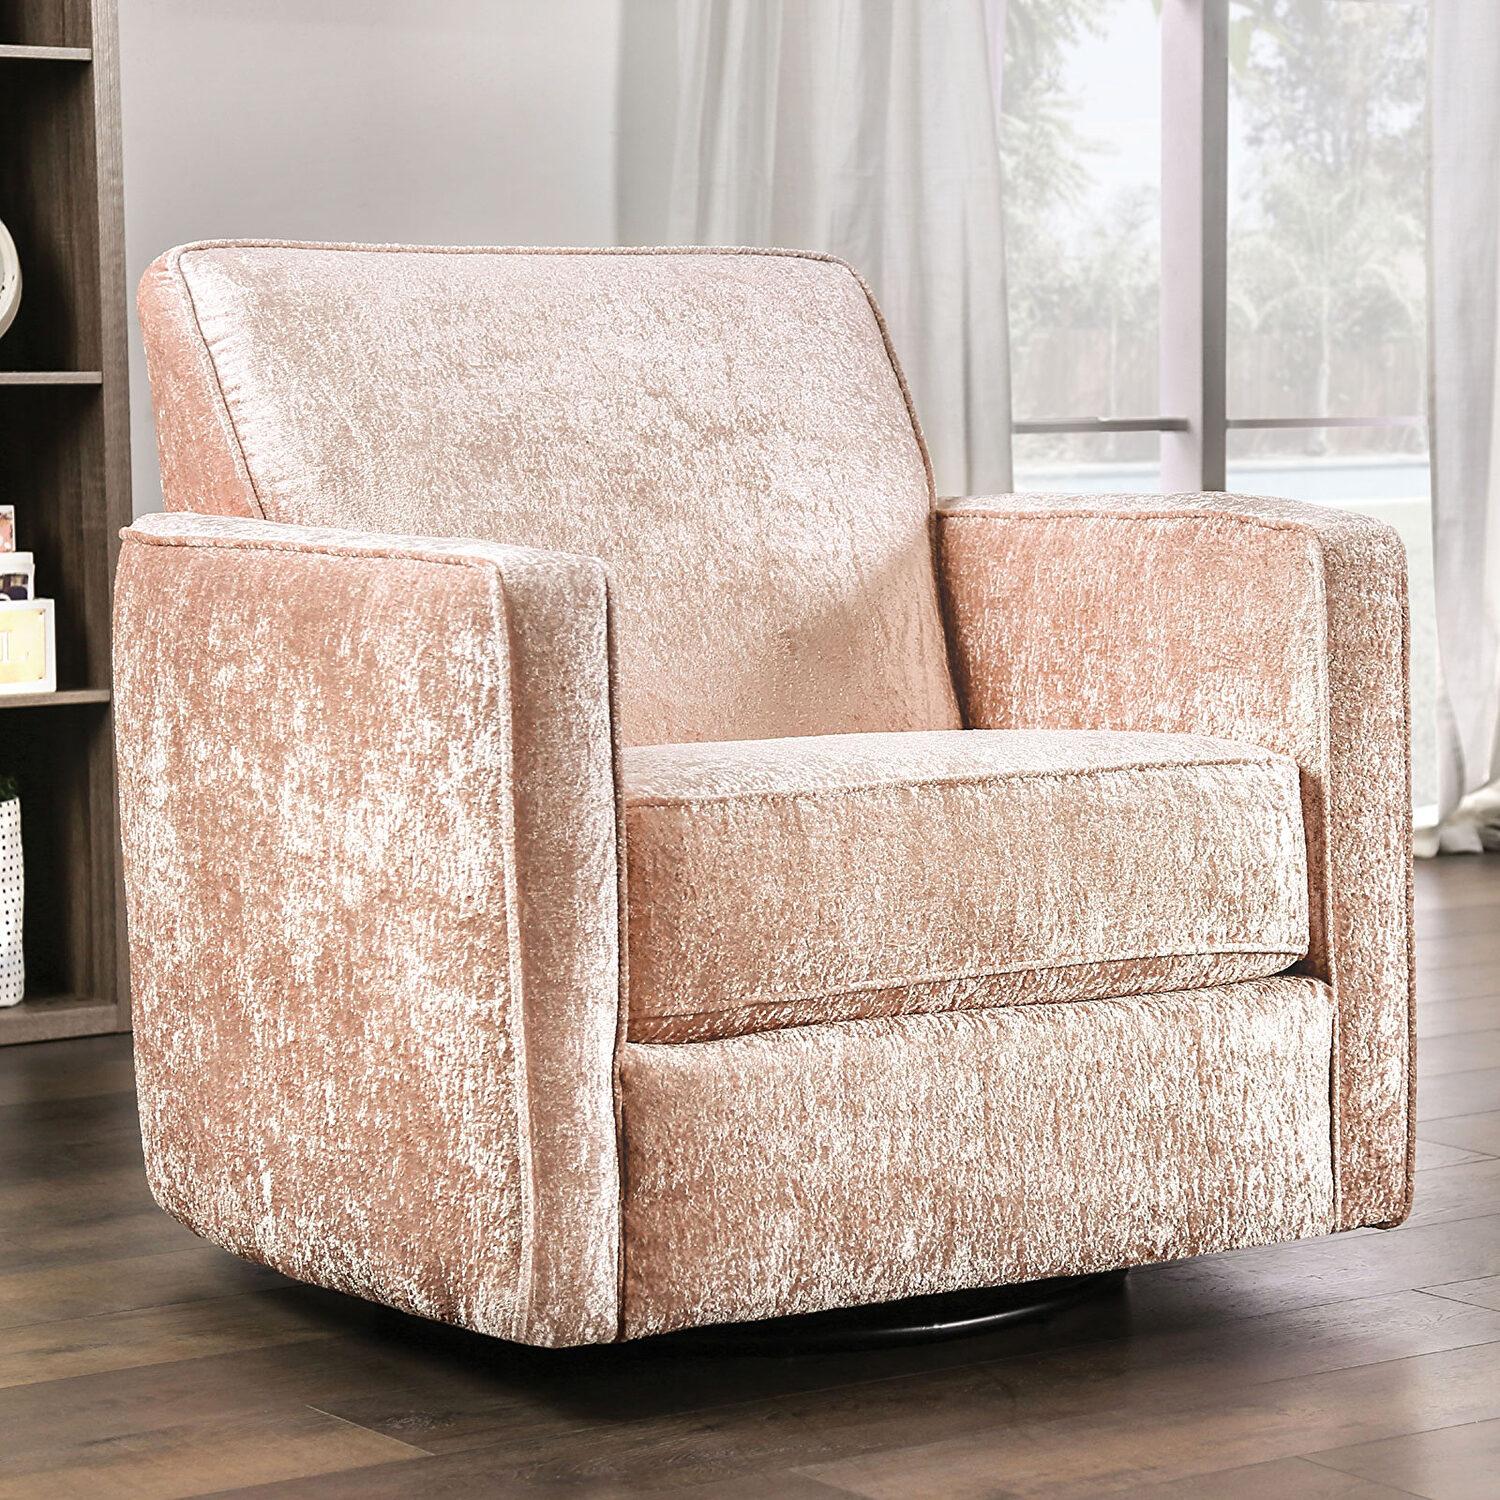 Transitional Arm Chair SM5167-CH Harriden SM5167-CH in Coral Chenille